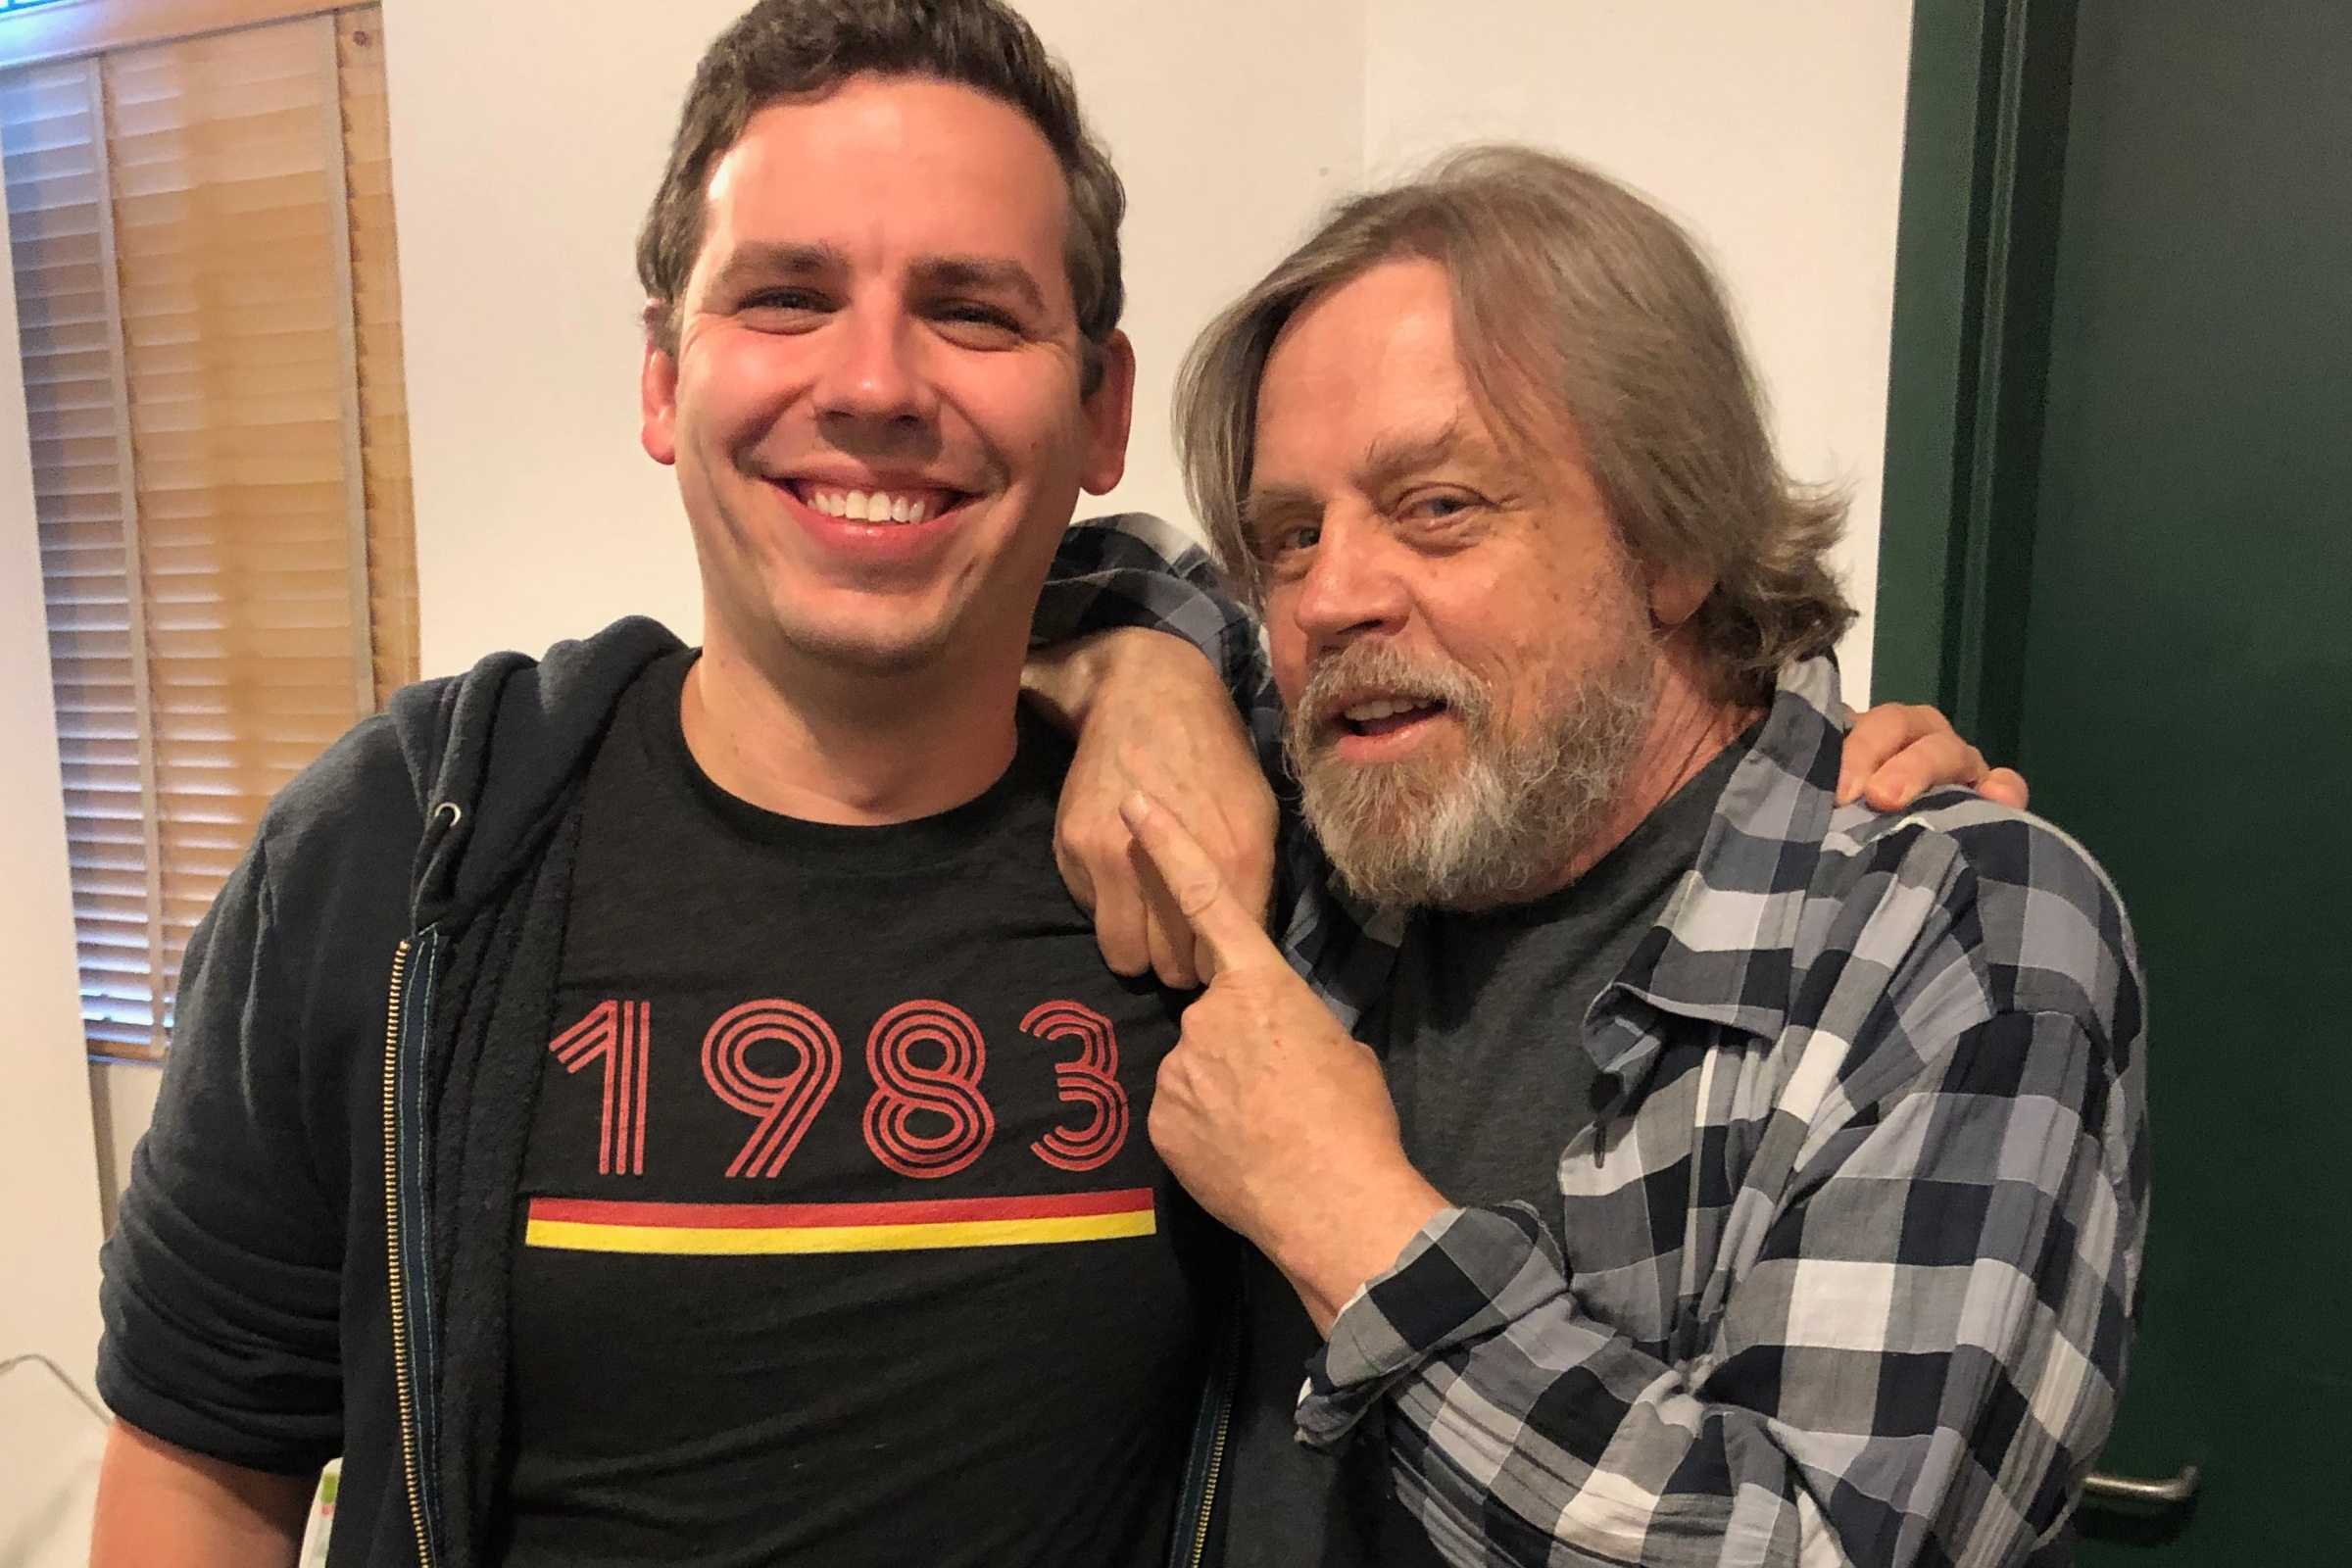 How ''Star Wars''' Mark Hamill lives life on his terms